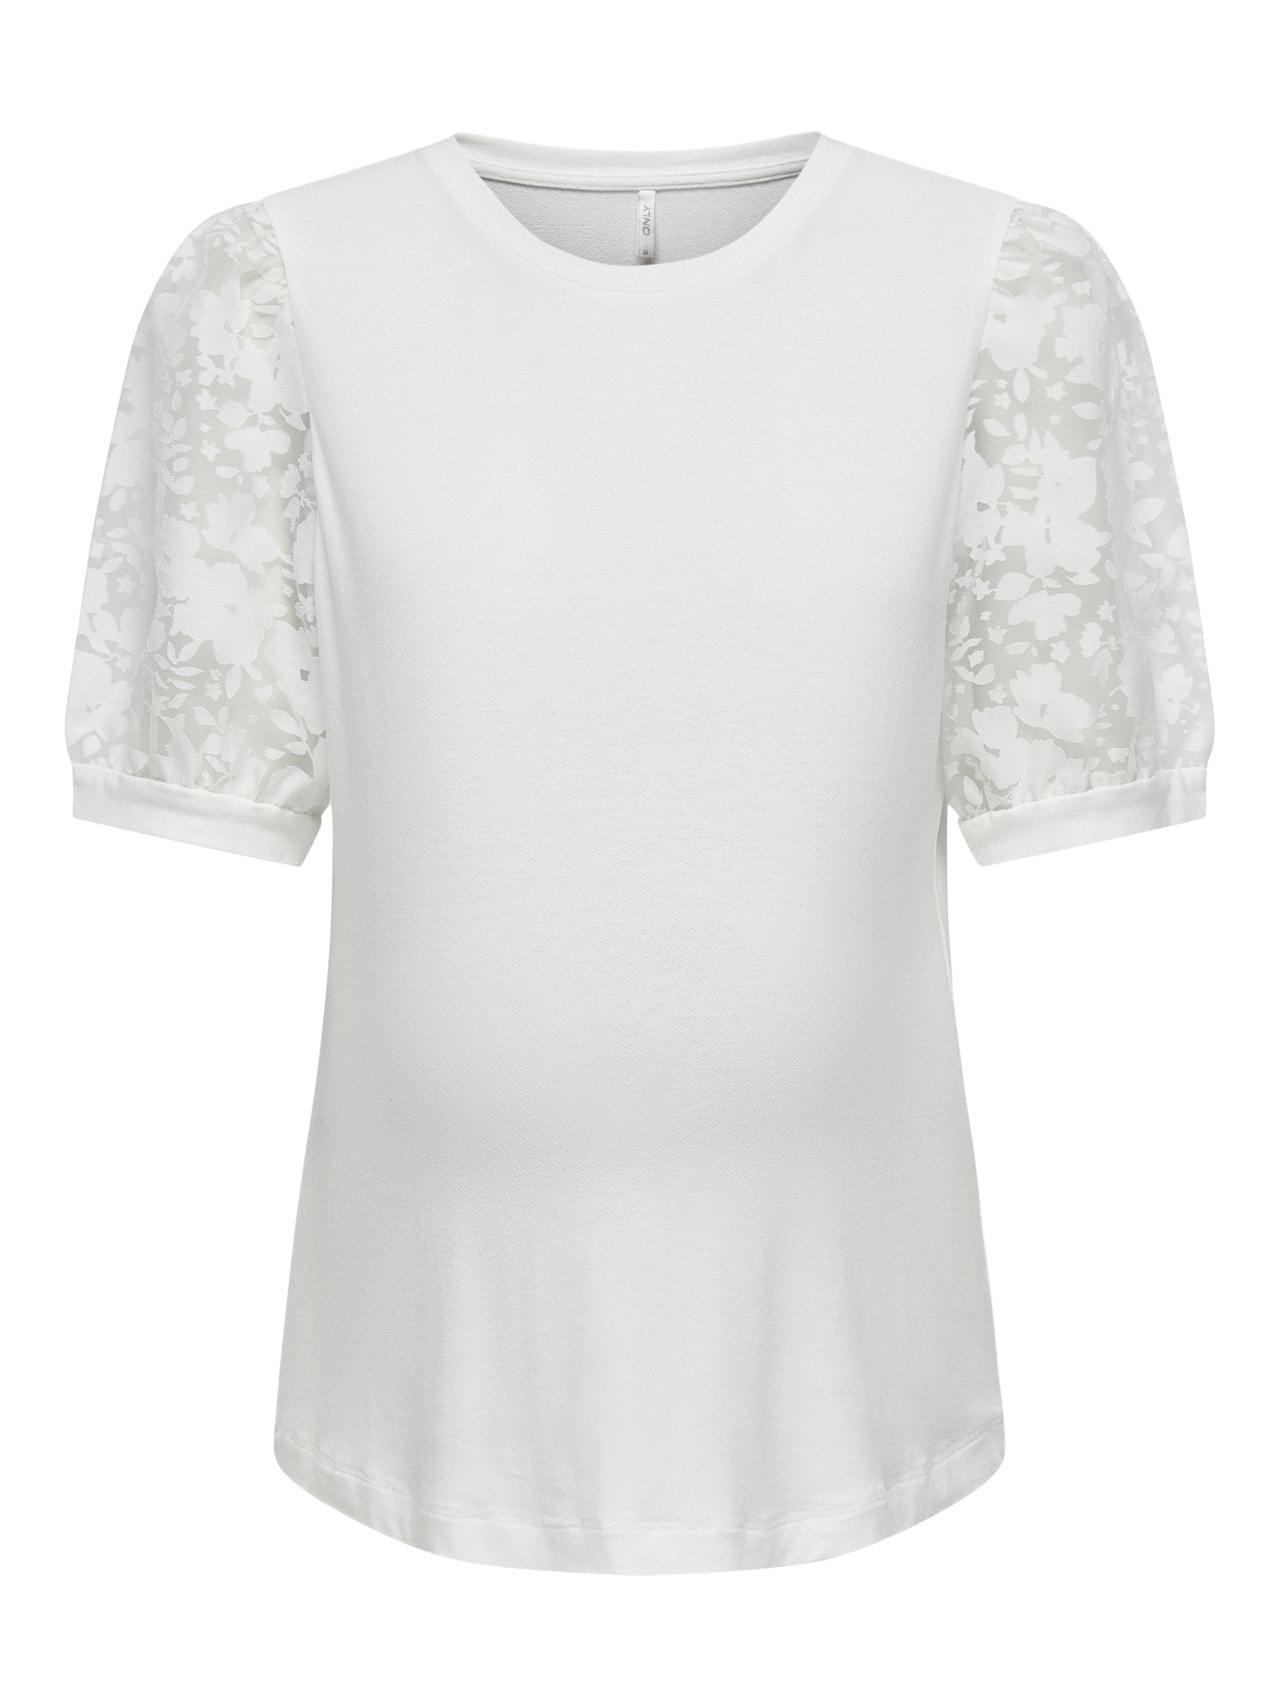 ONLY Mama Top With Lace Sleeves -Cloud Dancer - 15304026